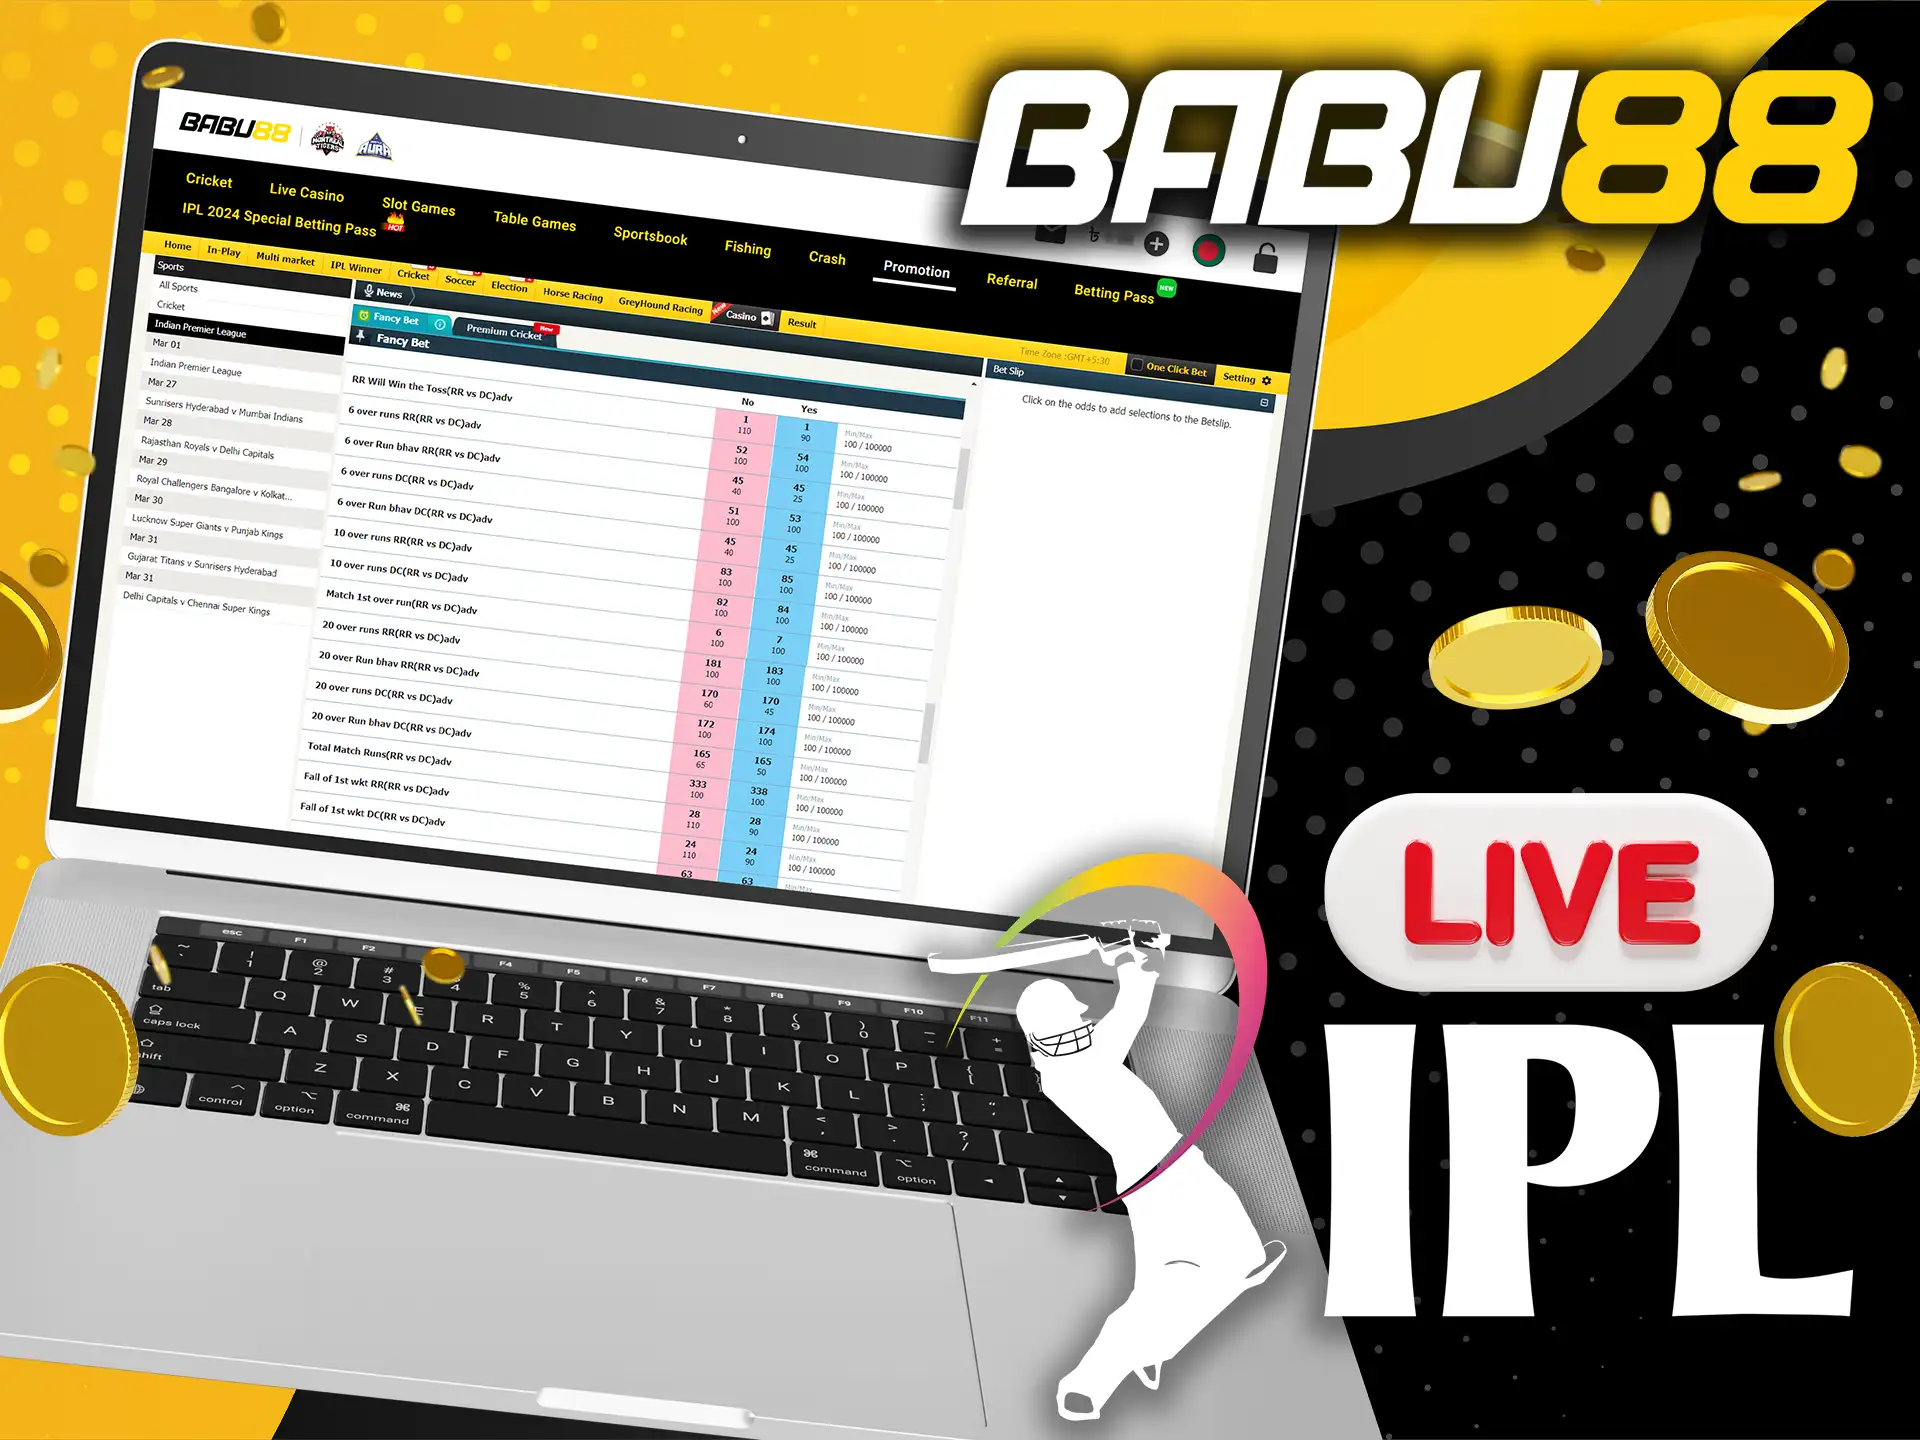 Use all Babu88 features for analytical betting.